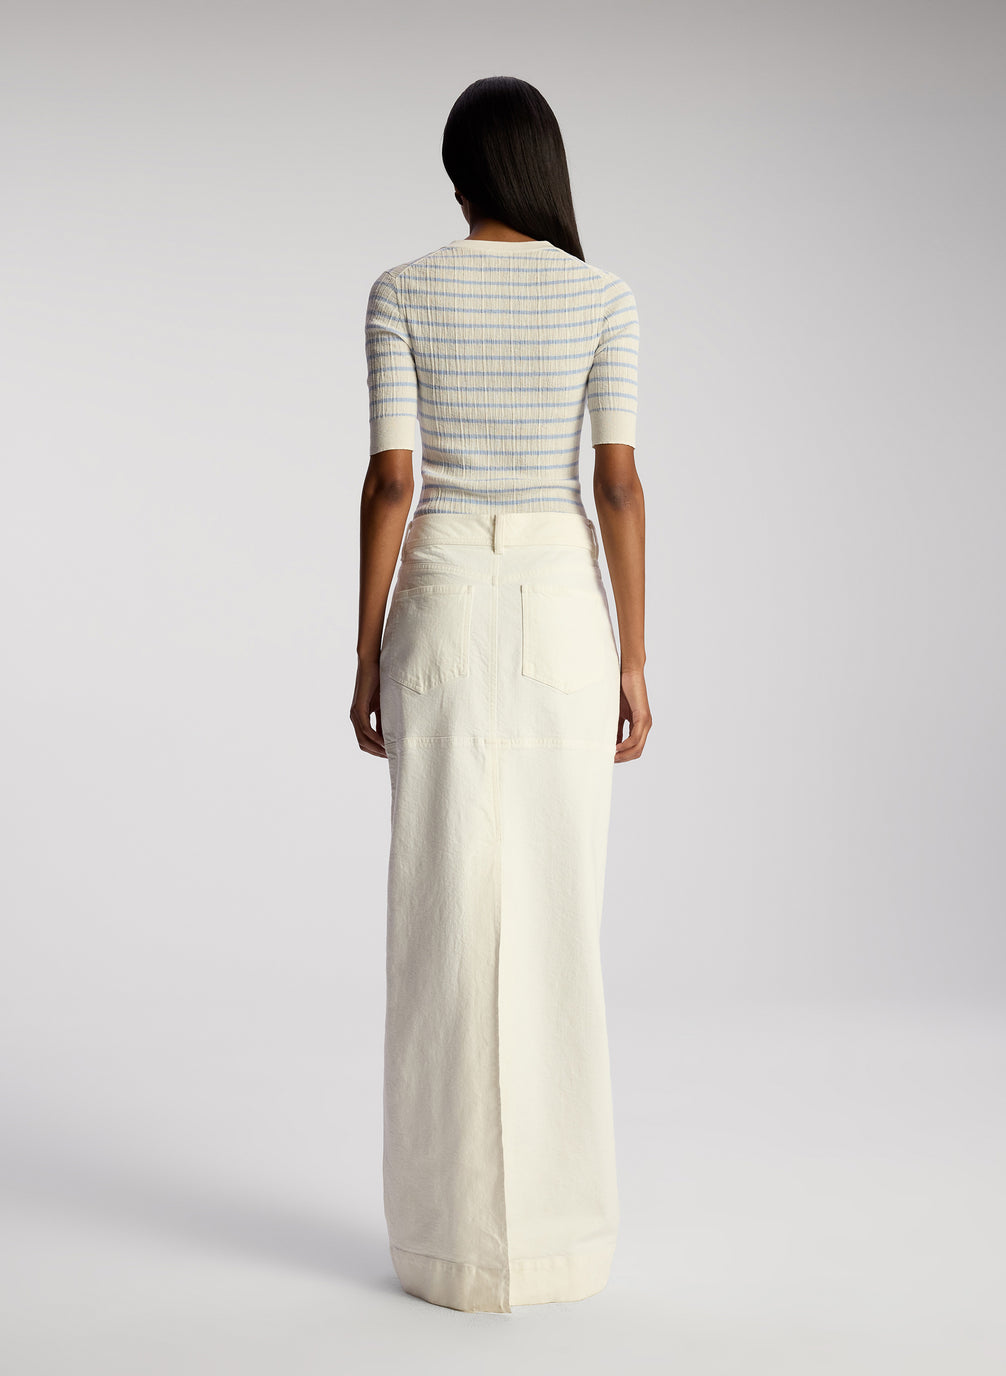 back view of woman wearing white and blue striped top and white maxi skirt